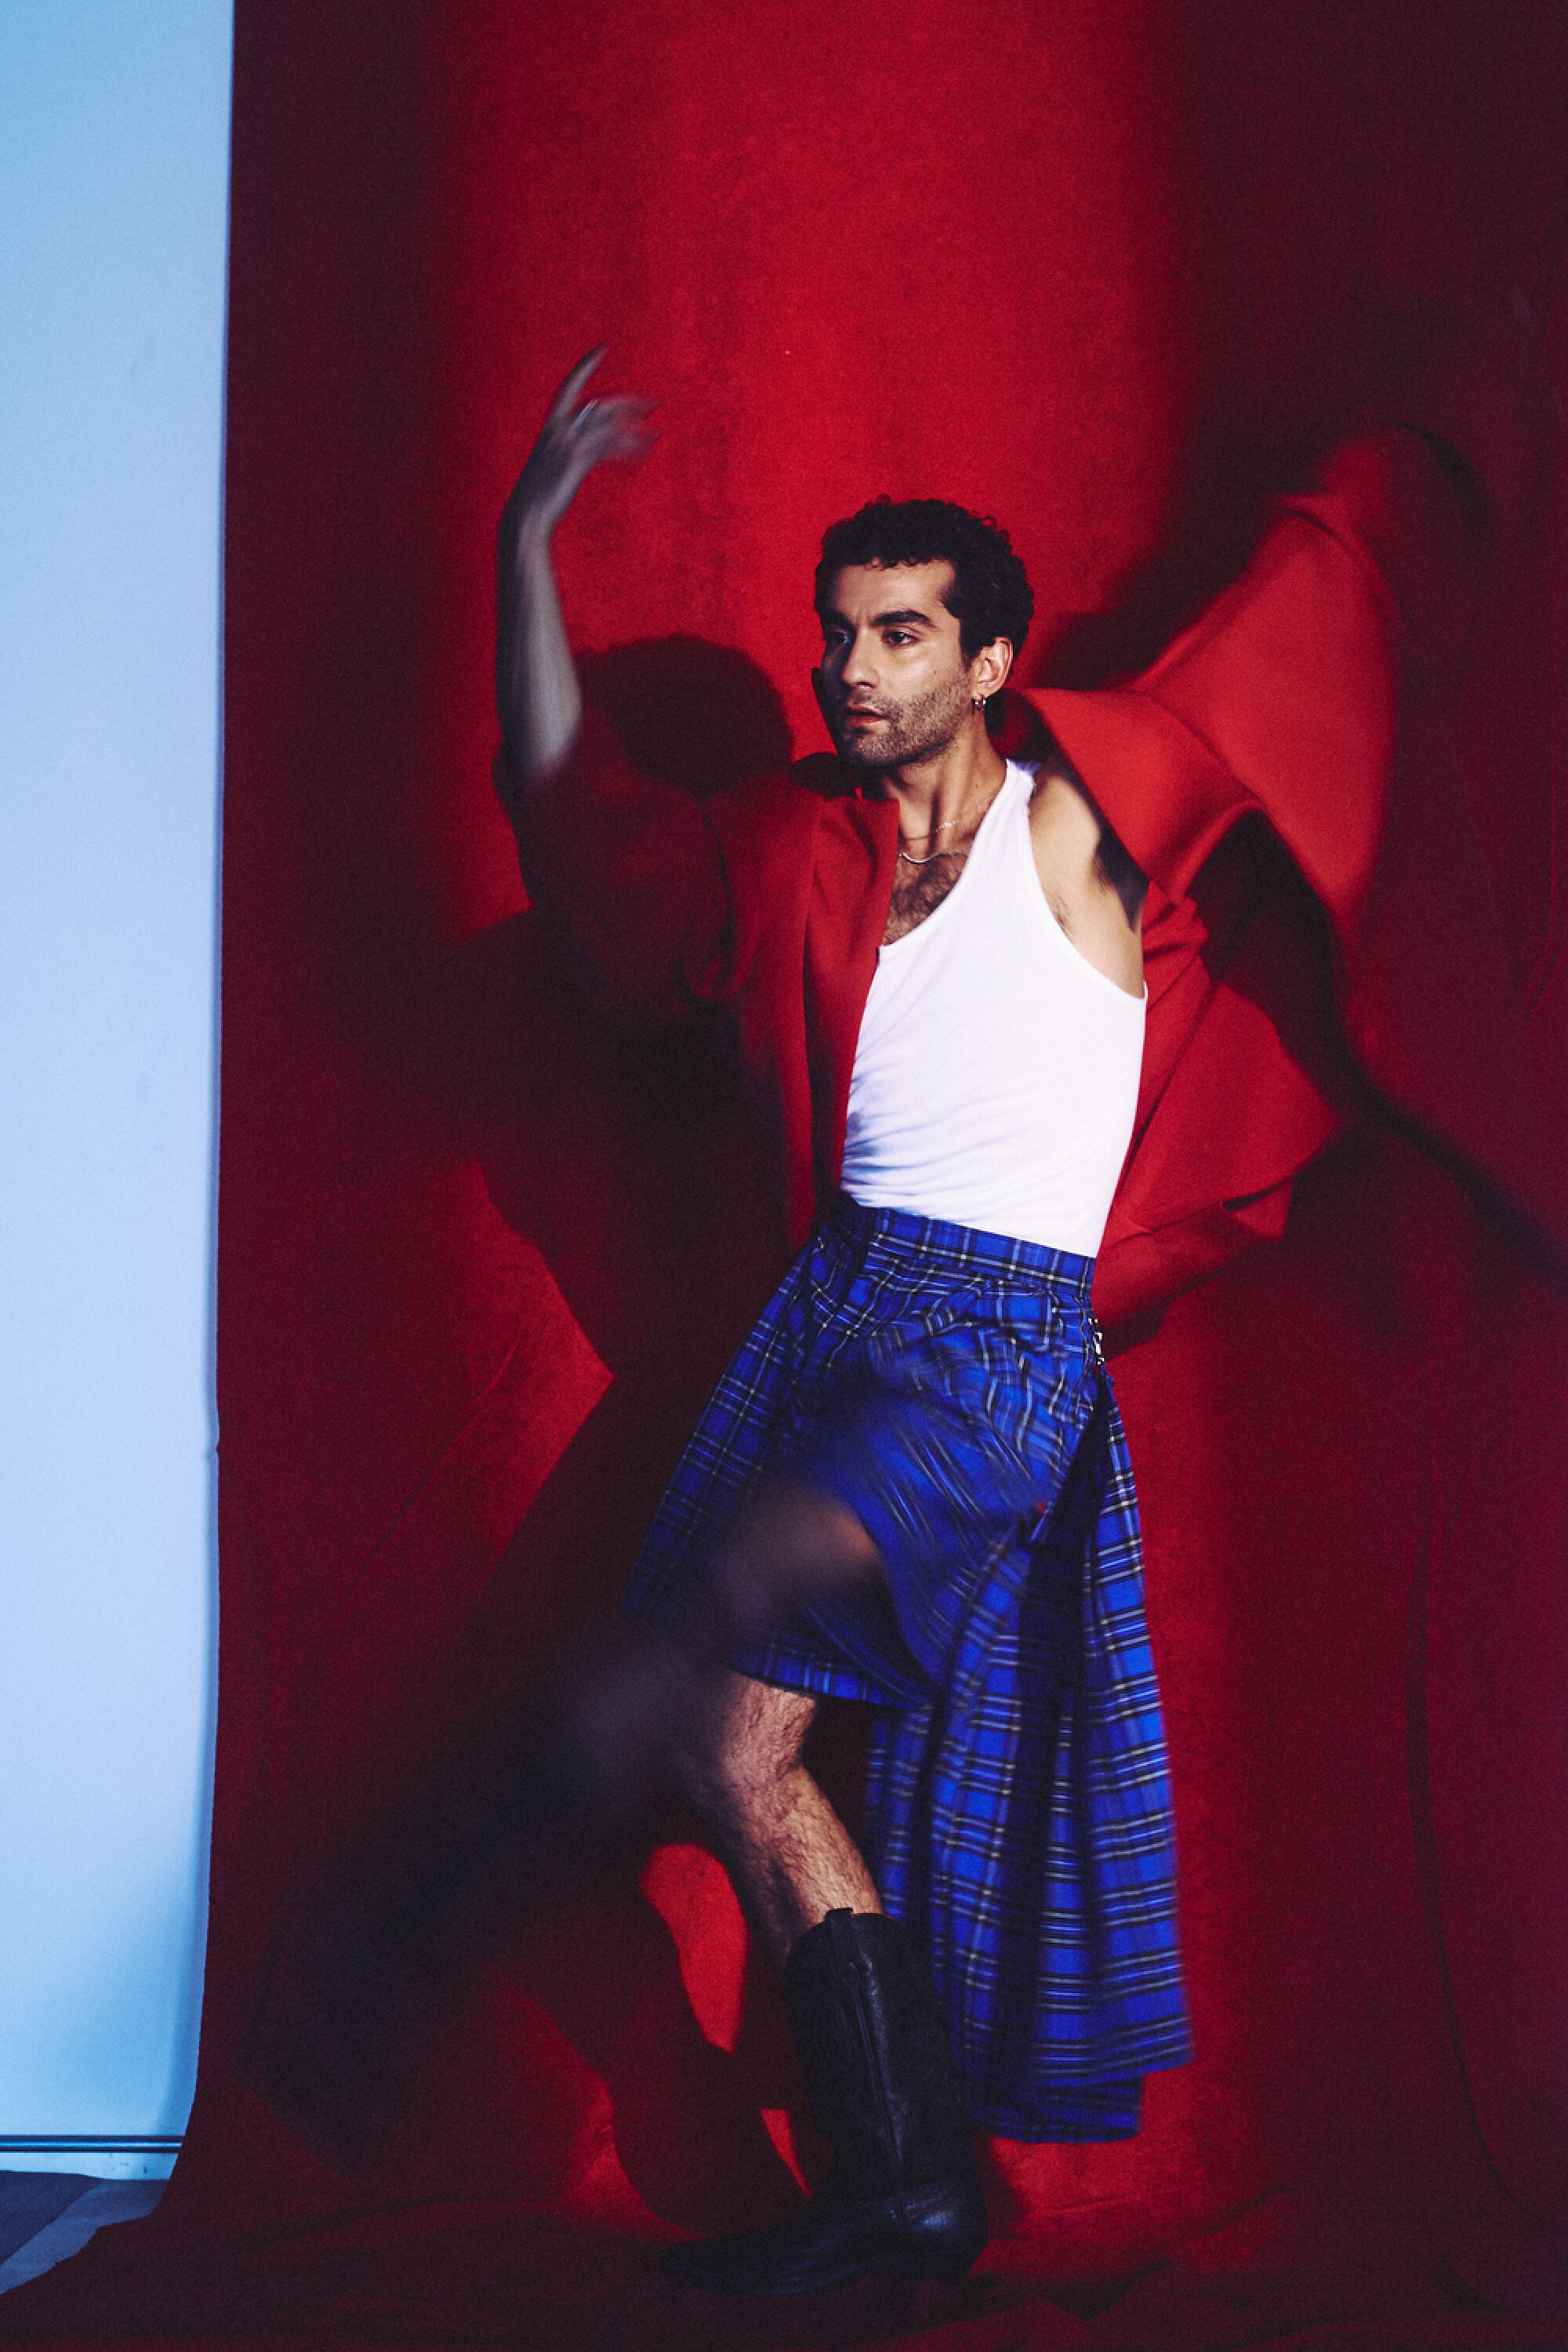 Vinicius Silva wearing a red zoot suit Jacket by Gypsy Sport and blue plaid skirt by Río Original.